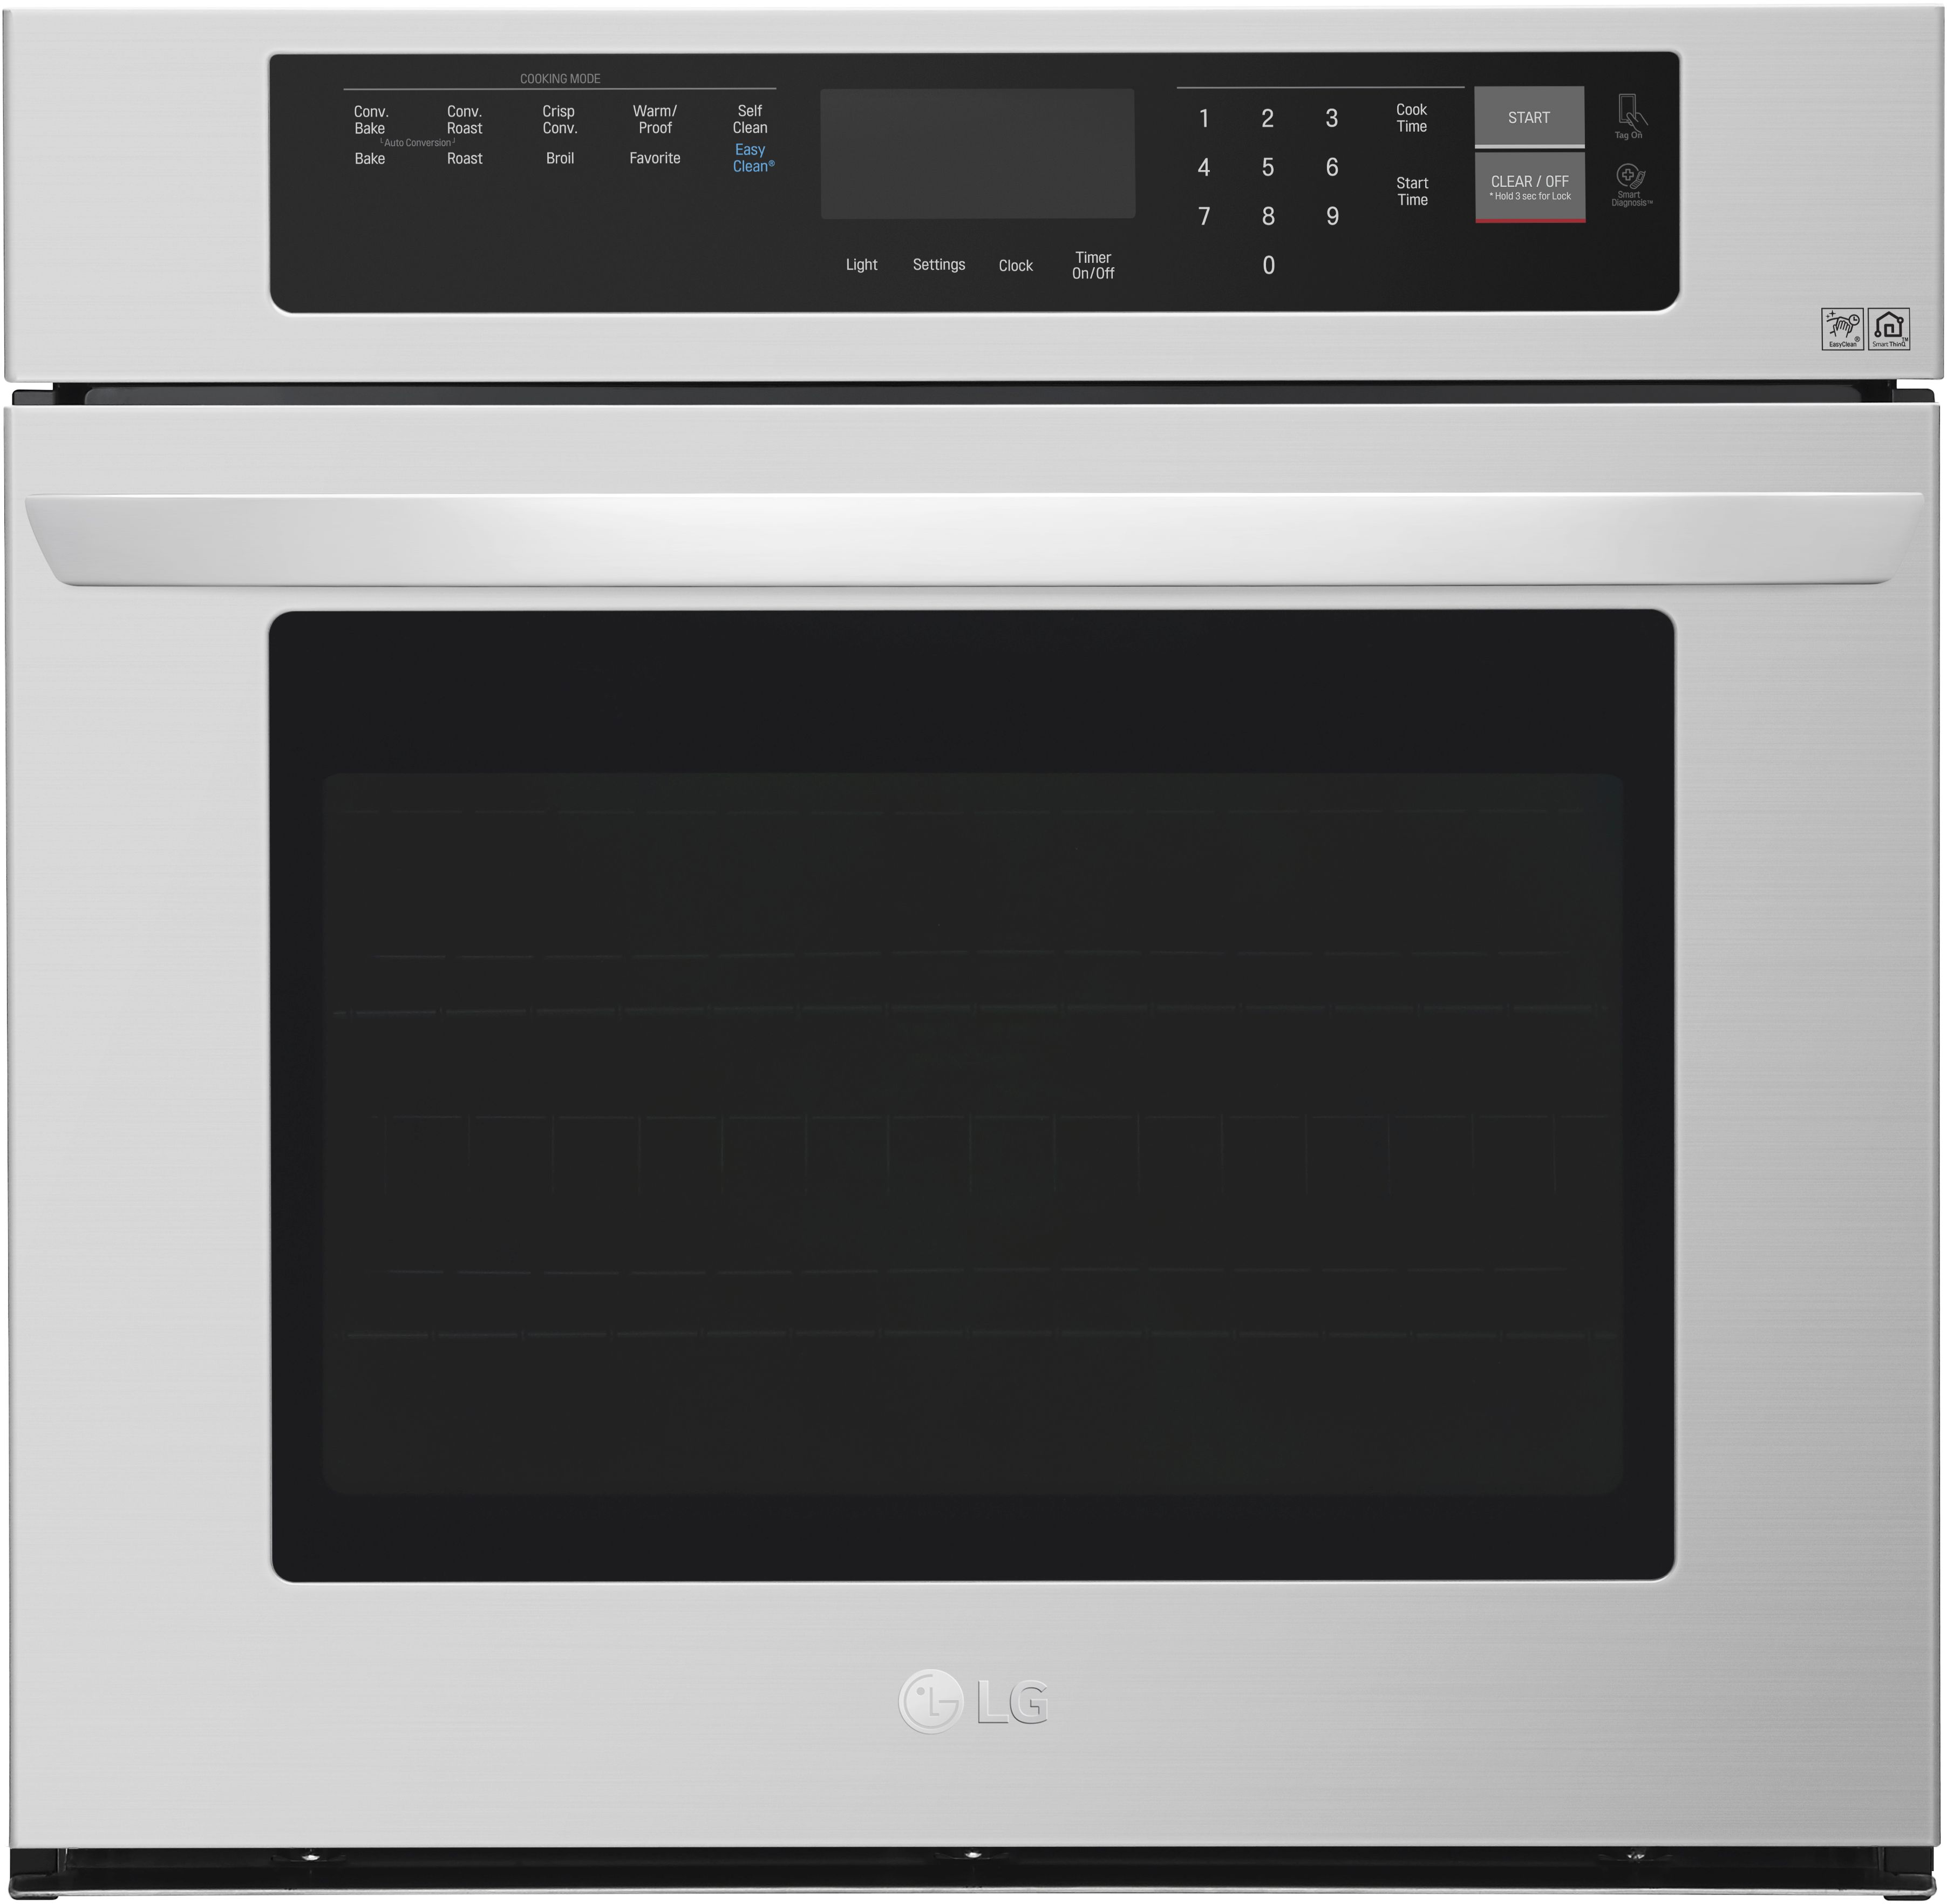 LG 30" Stainless Steel Single Electric Wall Oven